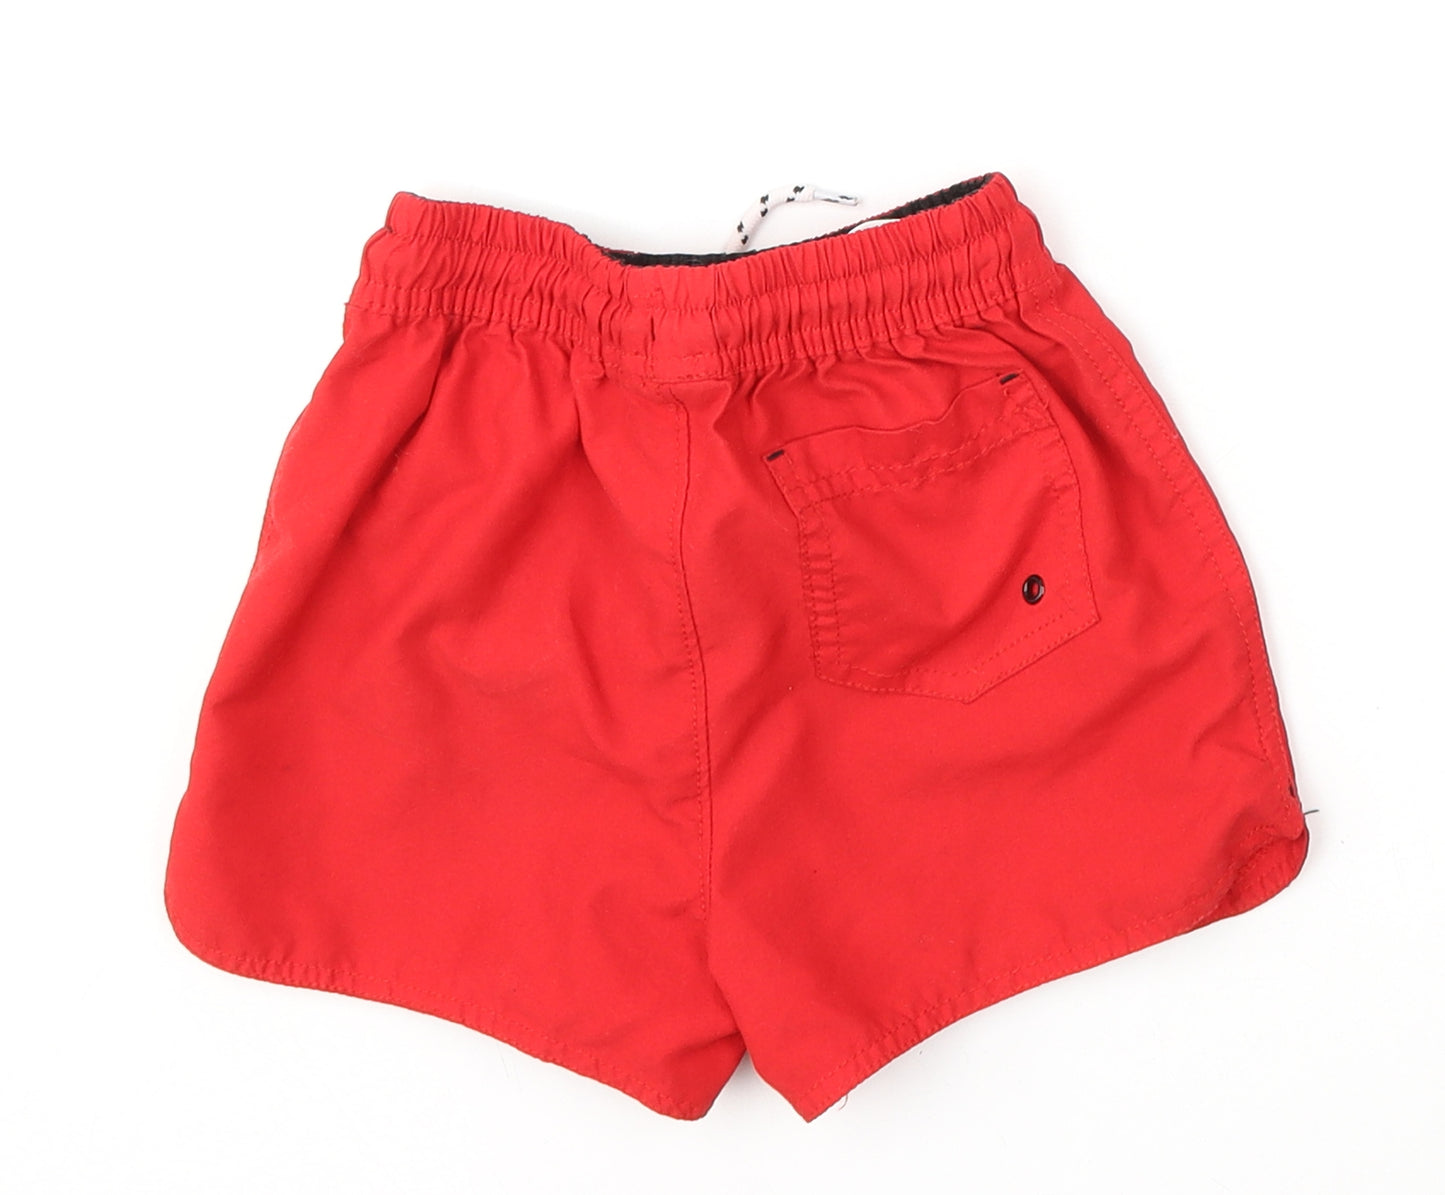 George Boys Red  Polyester Utility Shorts Size 5-6 Years  Regular